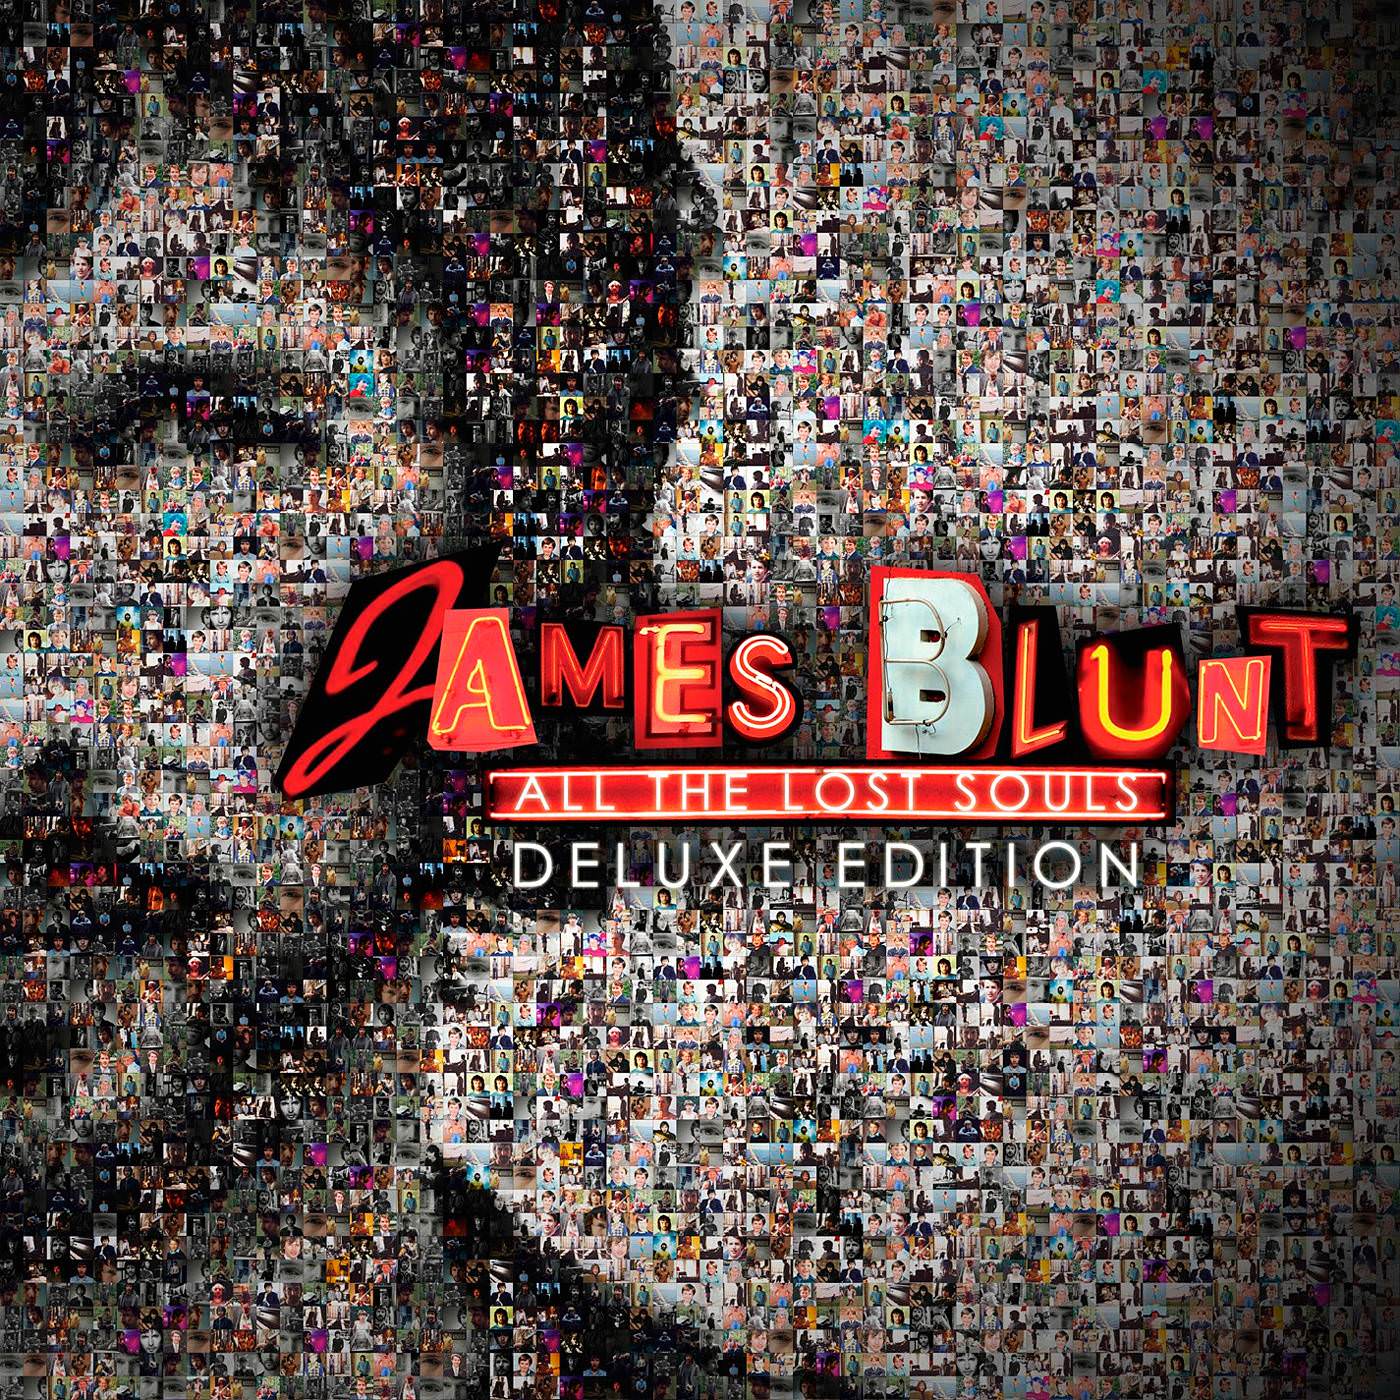 James Blunt - All The Lost Souls {Deluxe Edition} (2007/2013) [Qobuz FLAC 24bit/96kHz]